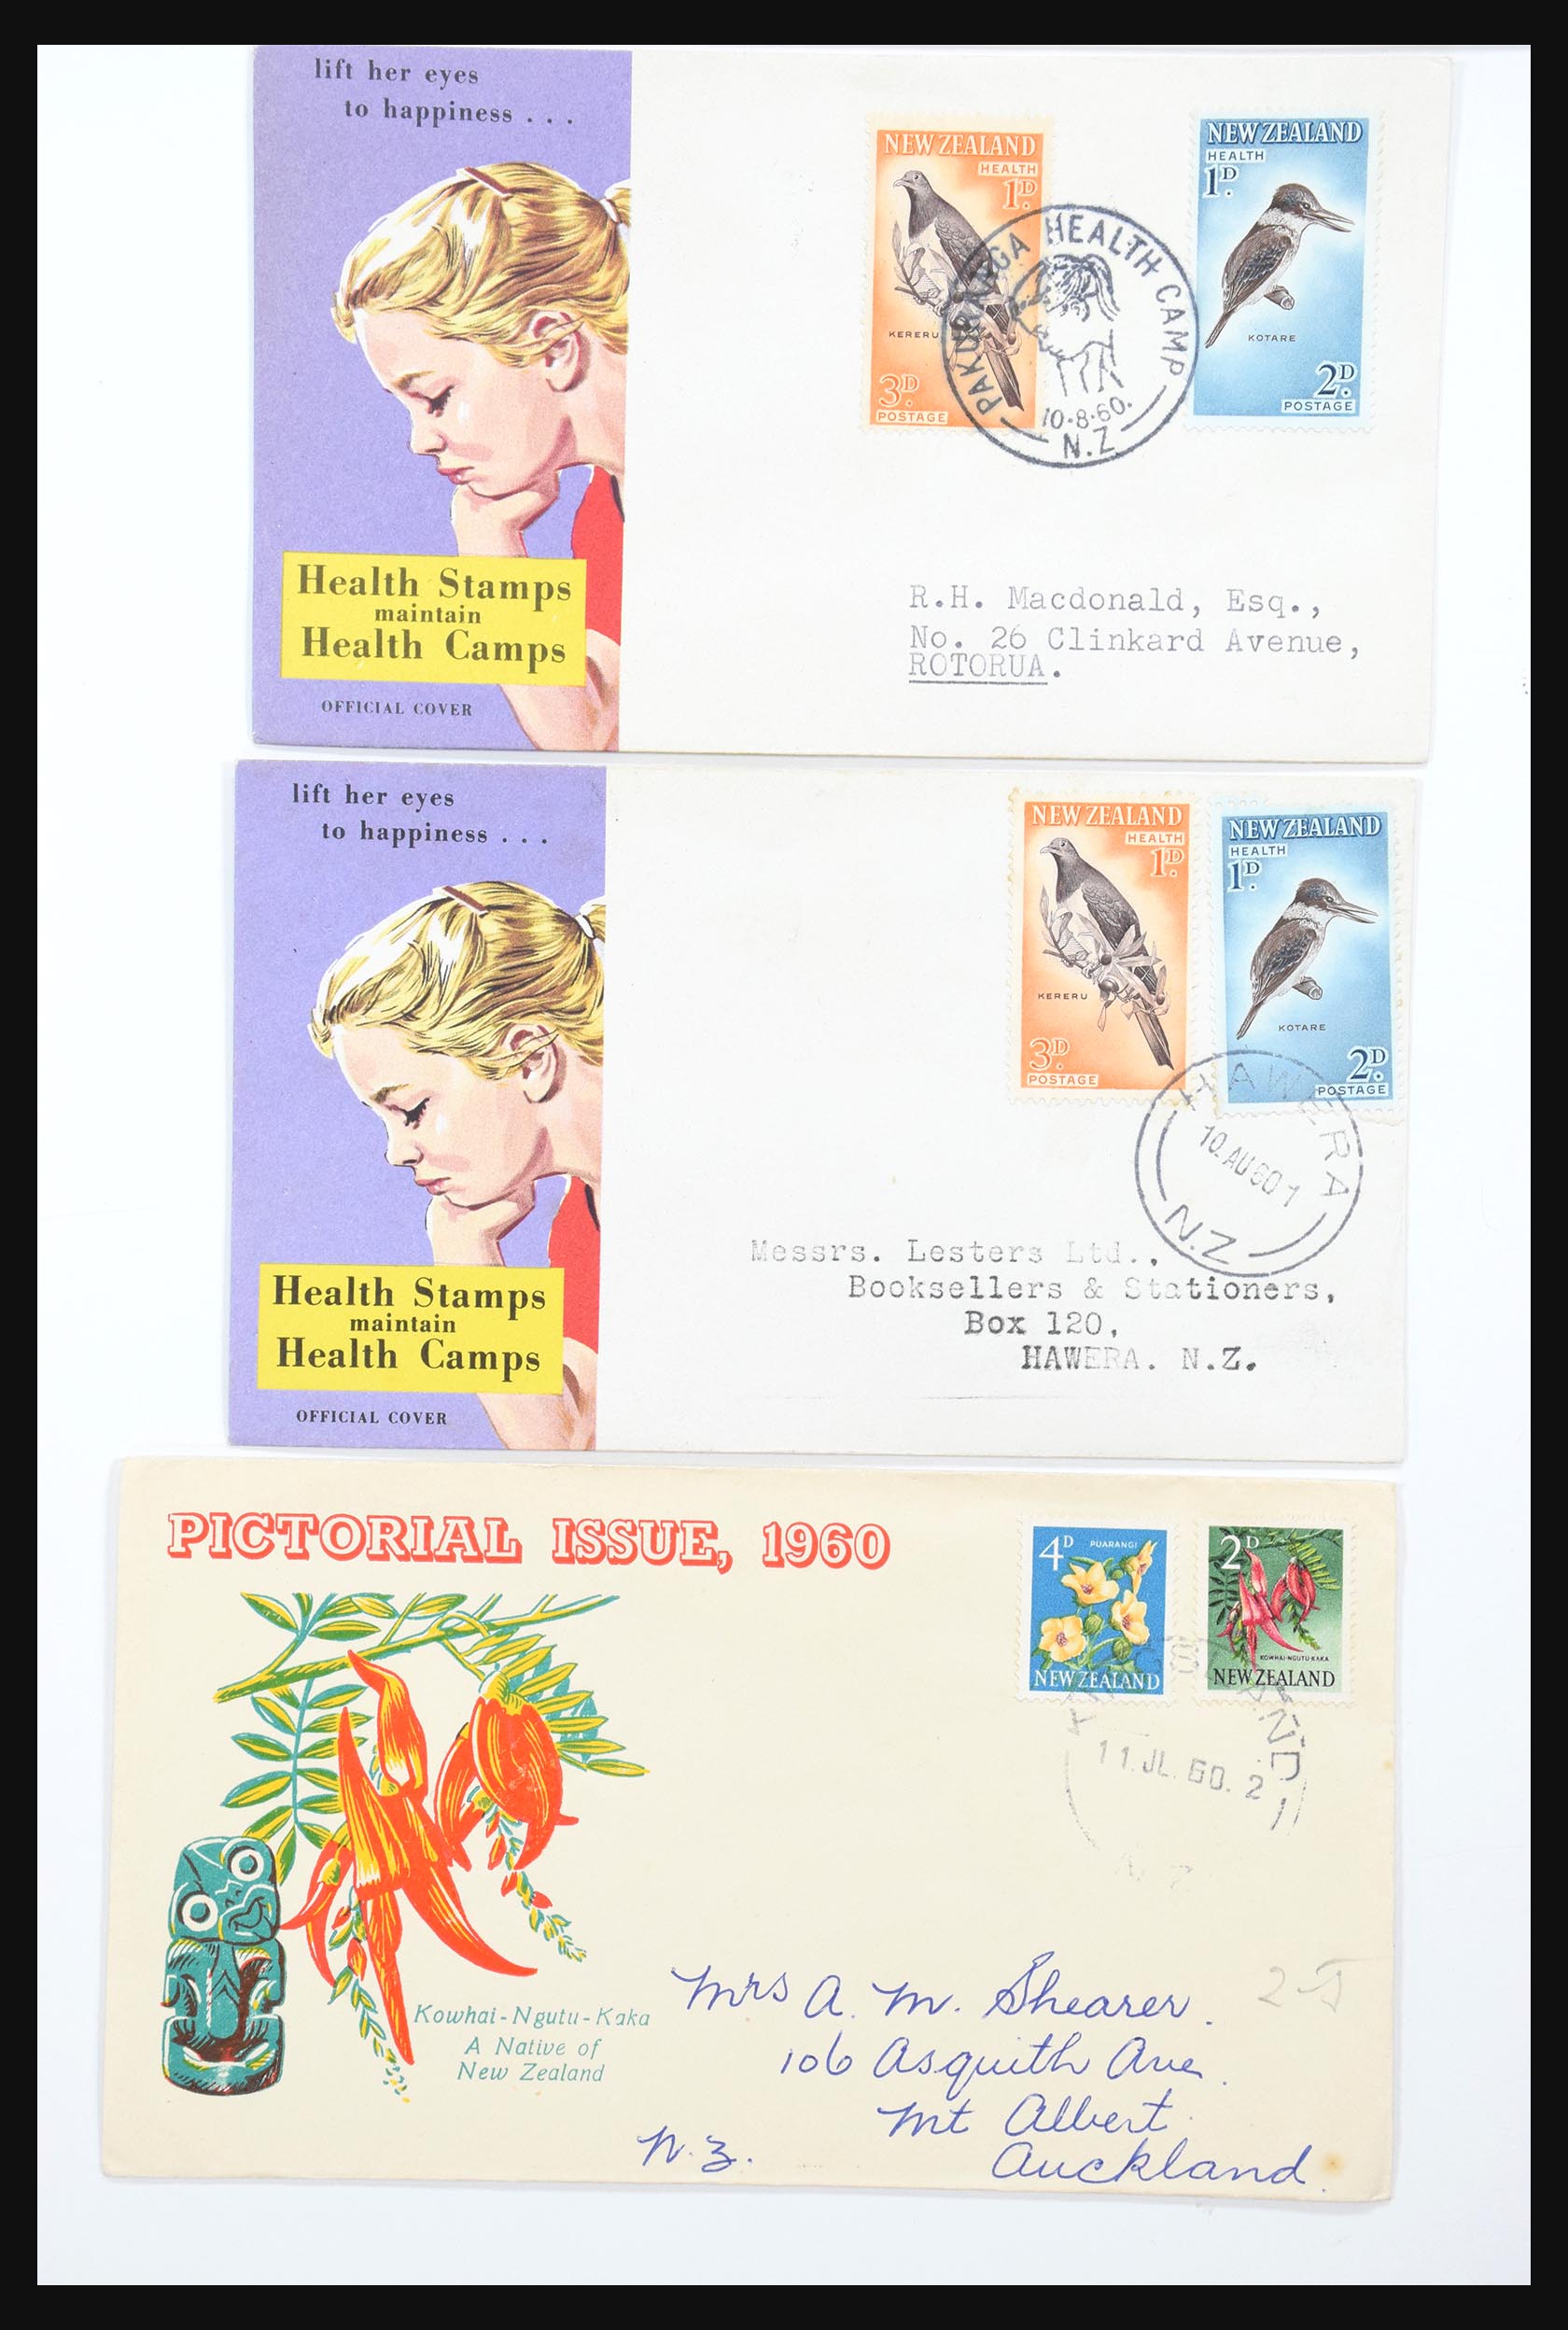 30821 012 - 30821 New Zealand FDC's 1960-1971.